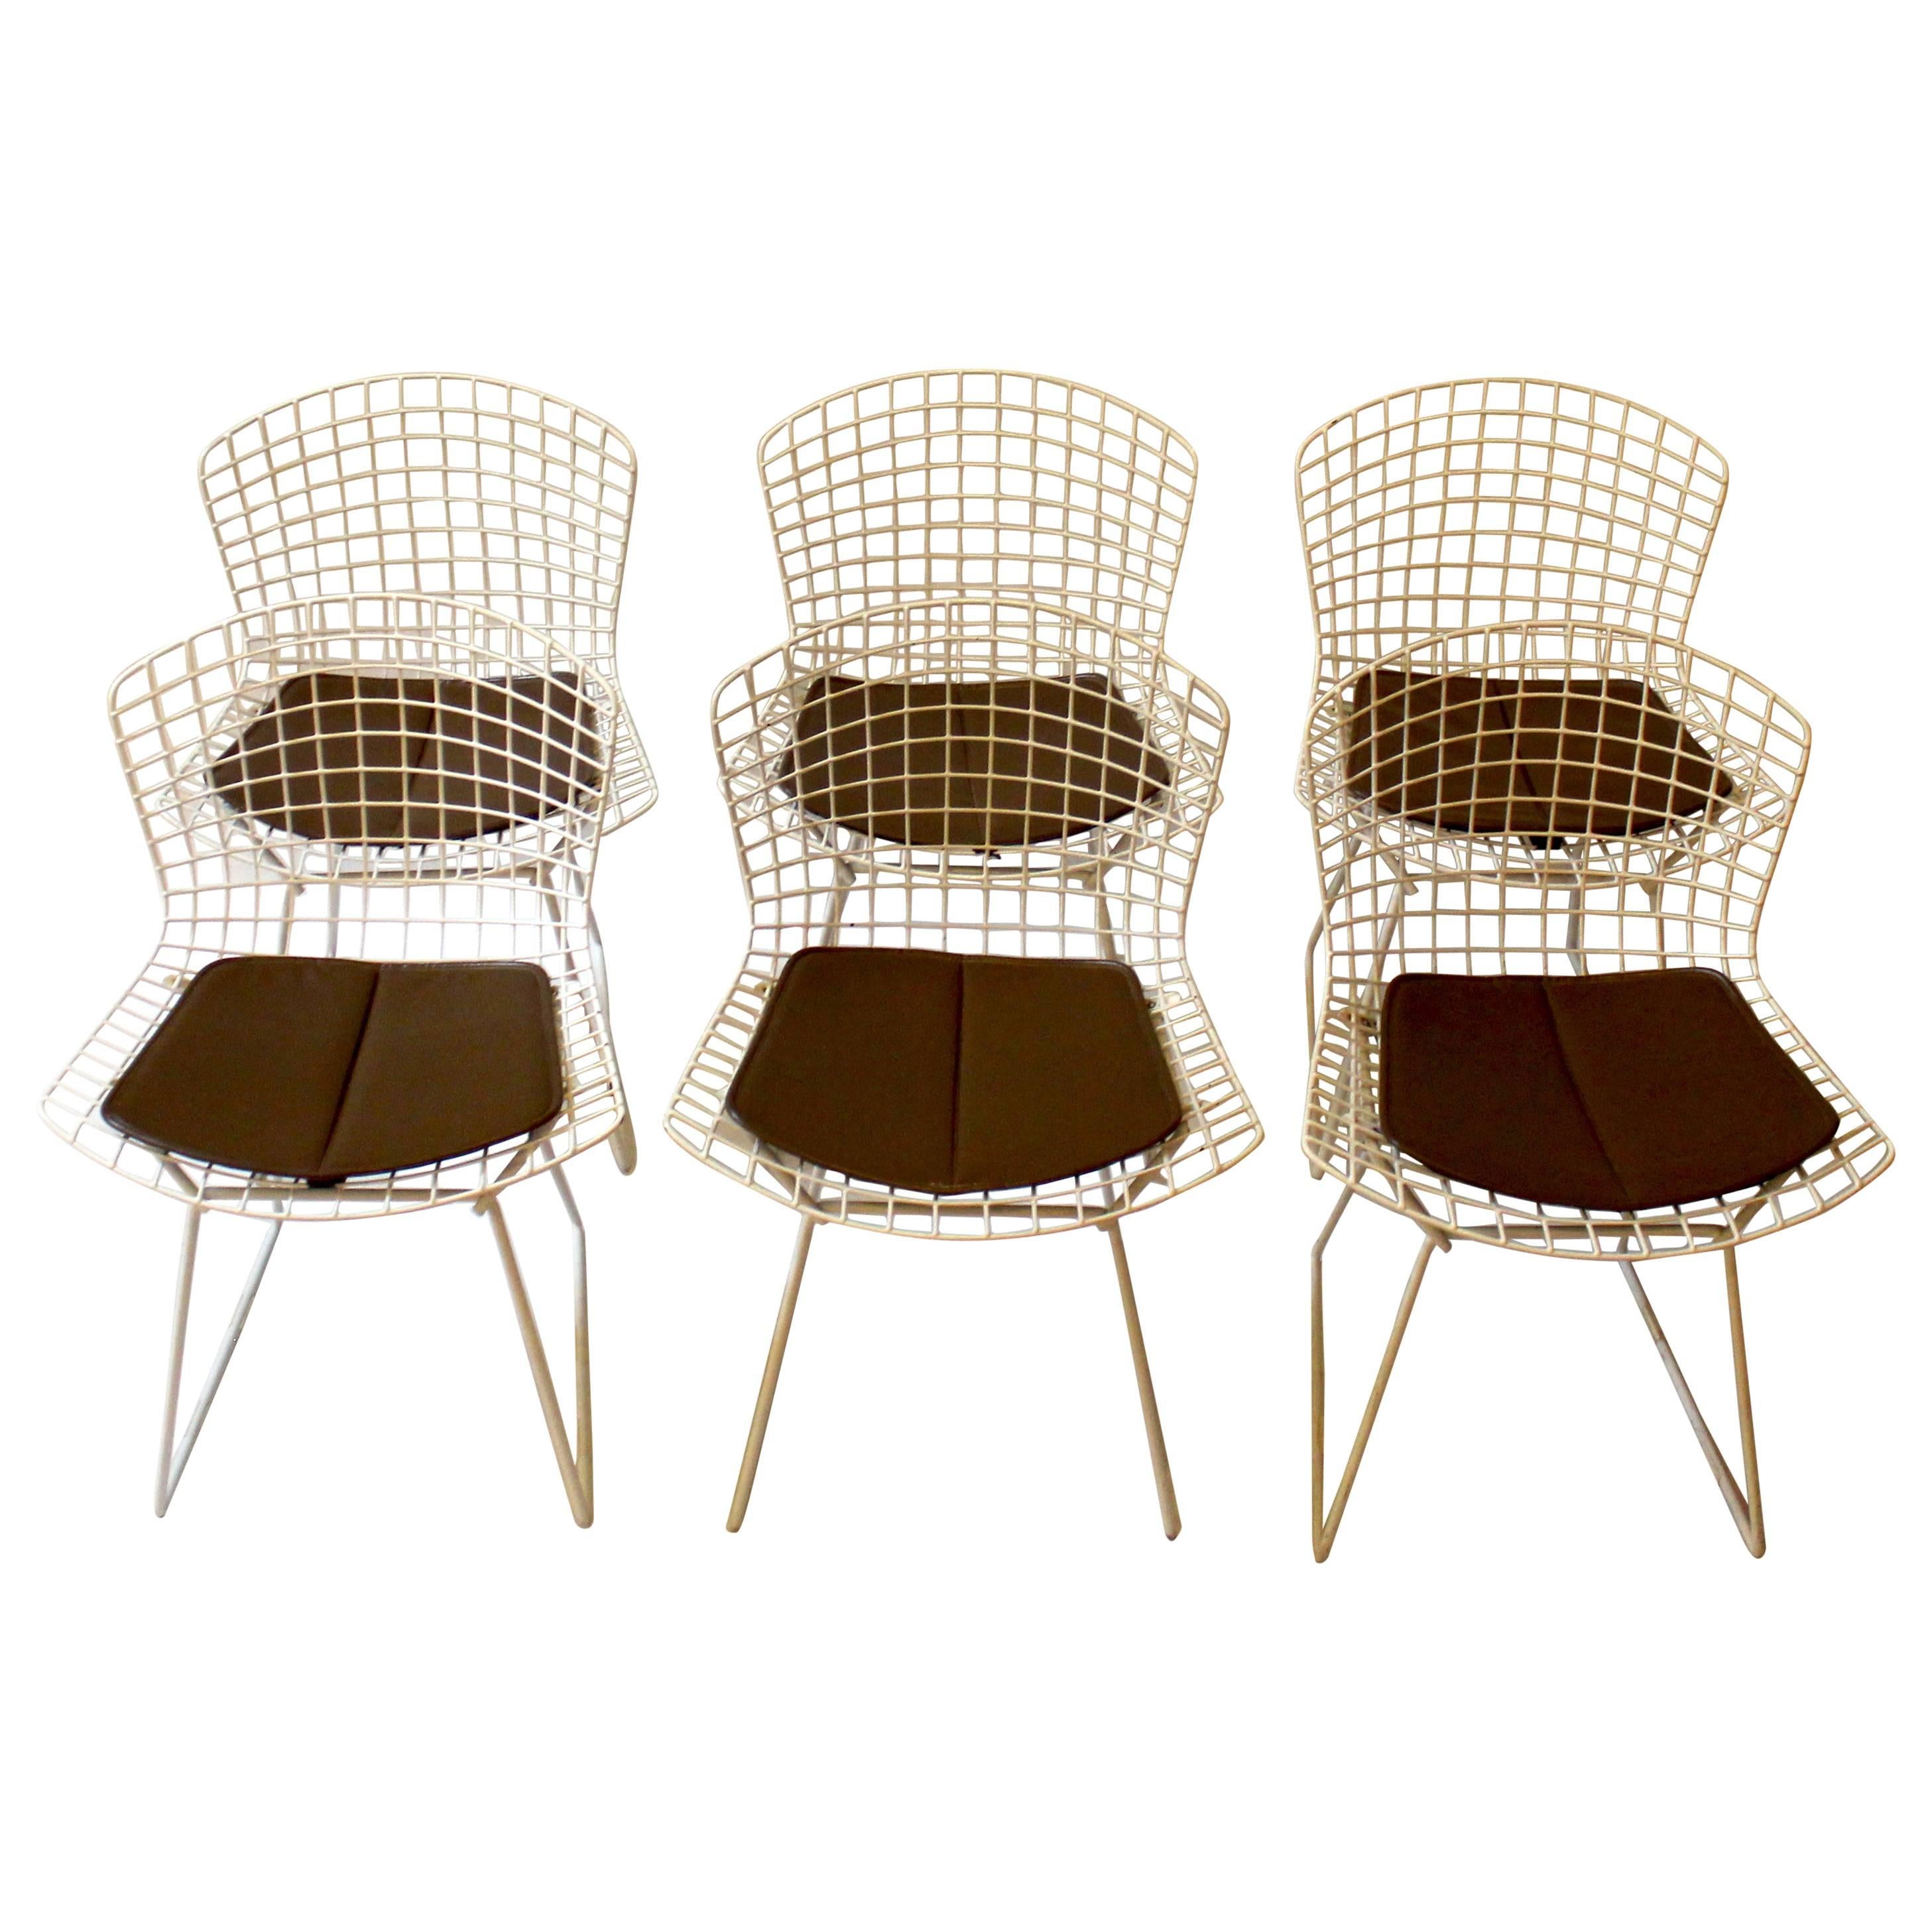 Set of six 1960s Harry Bertoia Side Chairs for Knoll with Original Seat Pads